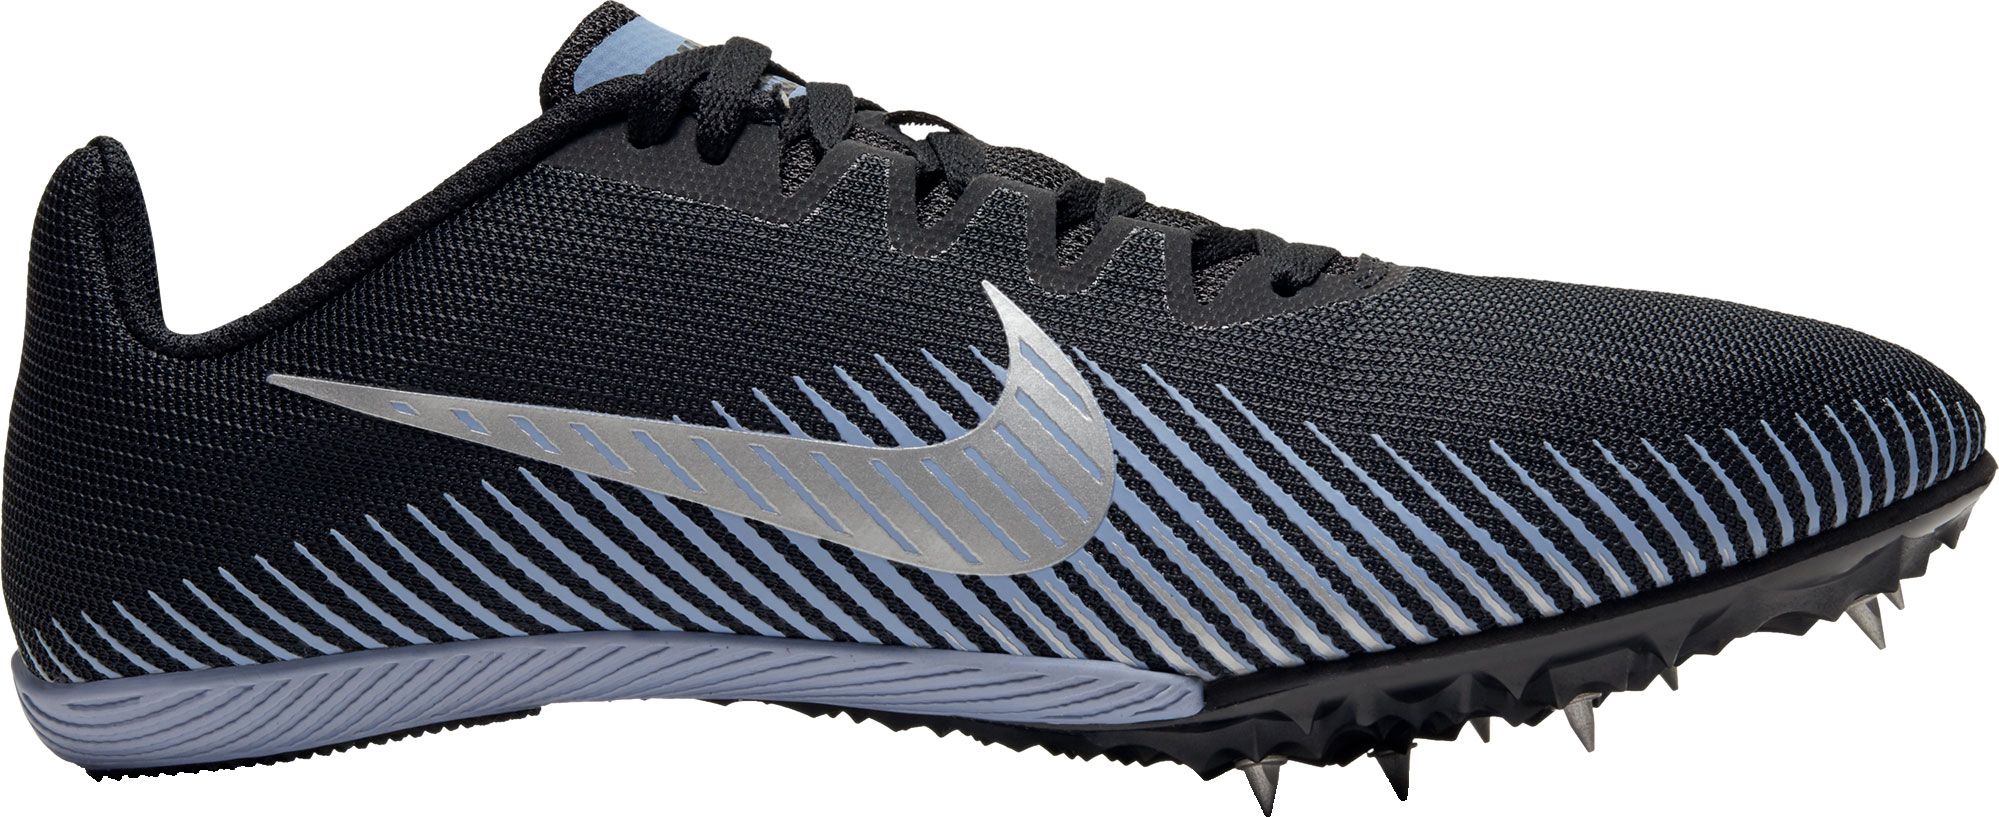 cross country spikes nike